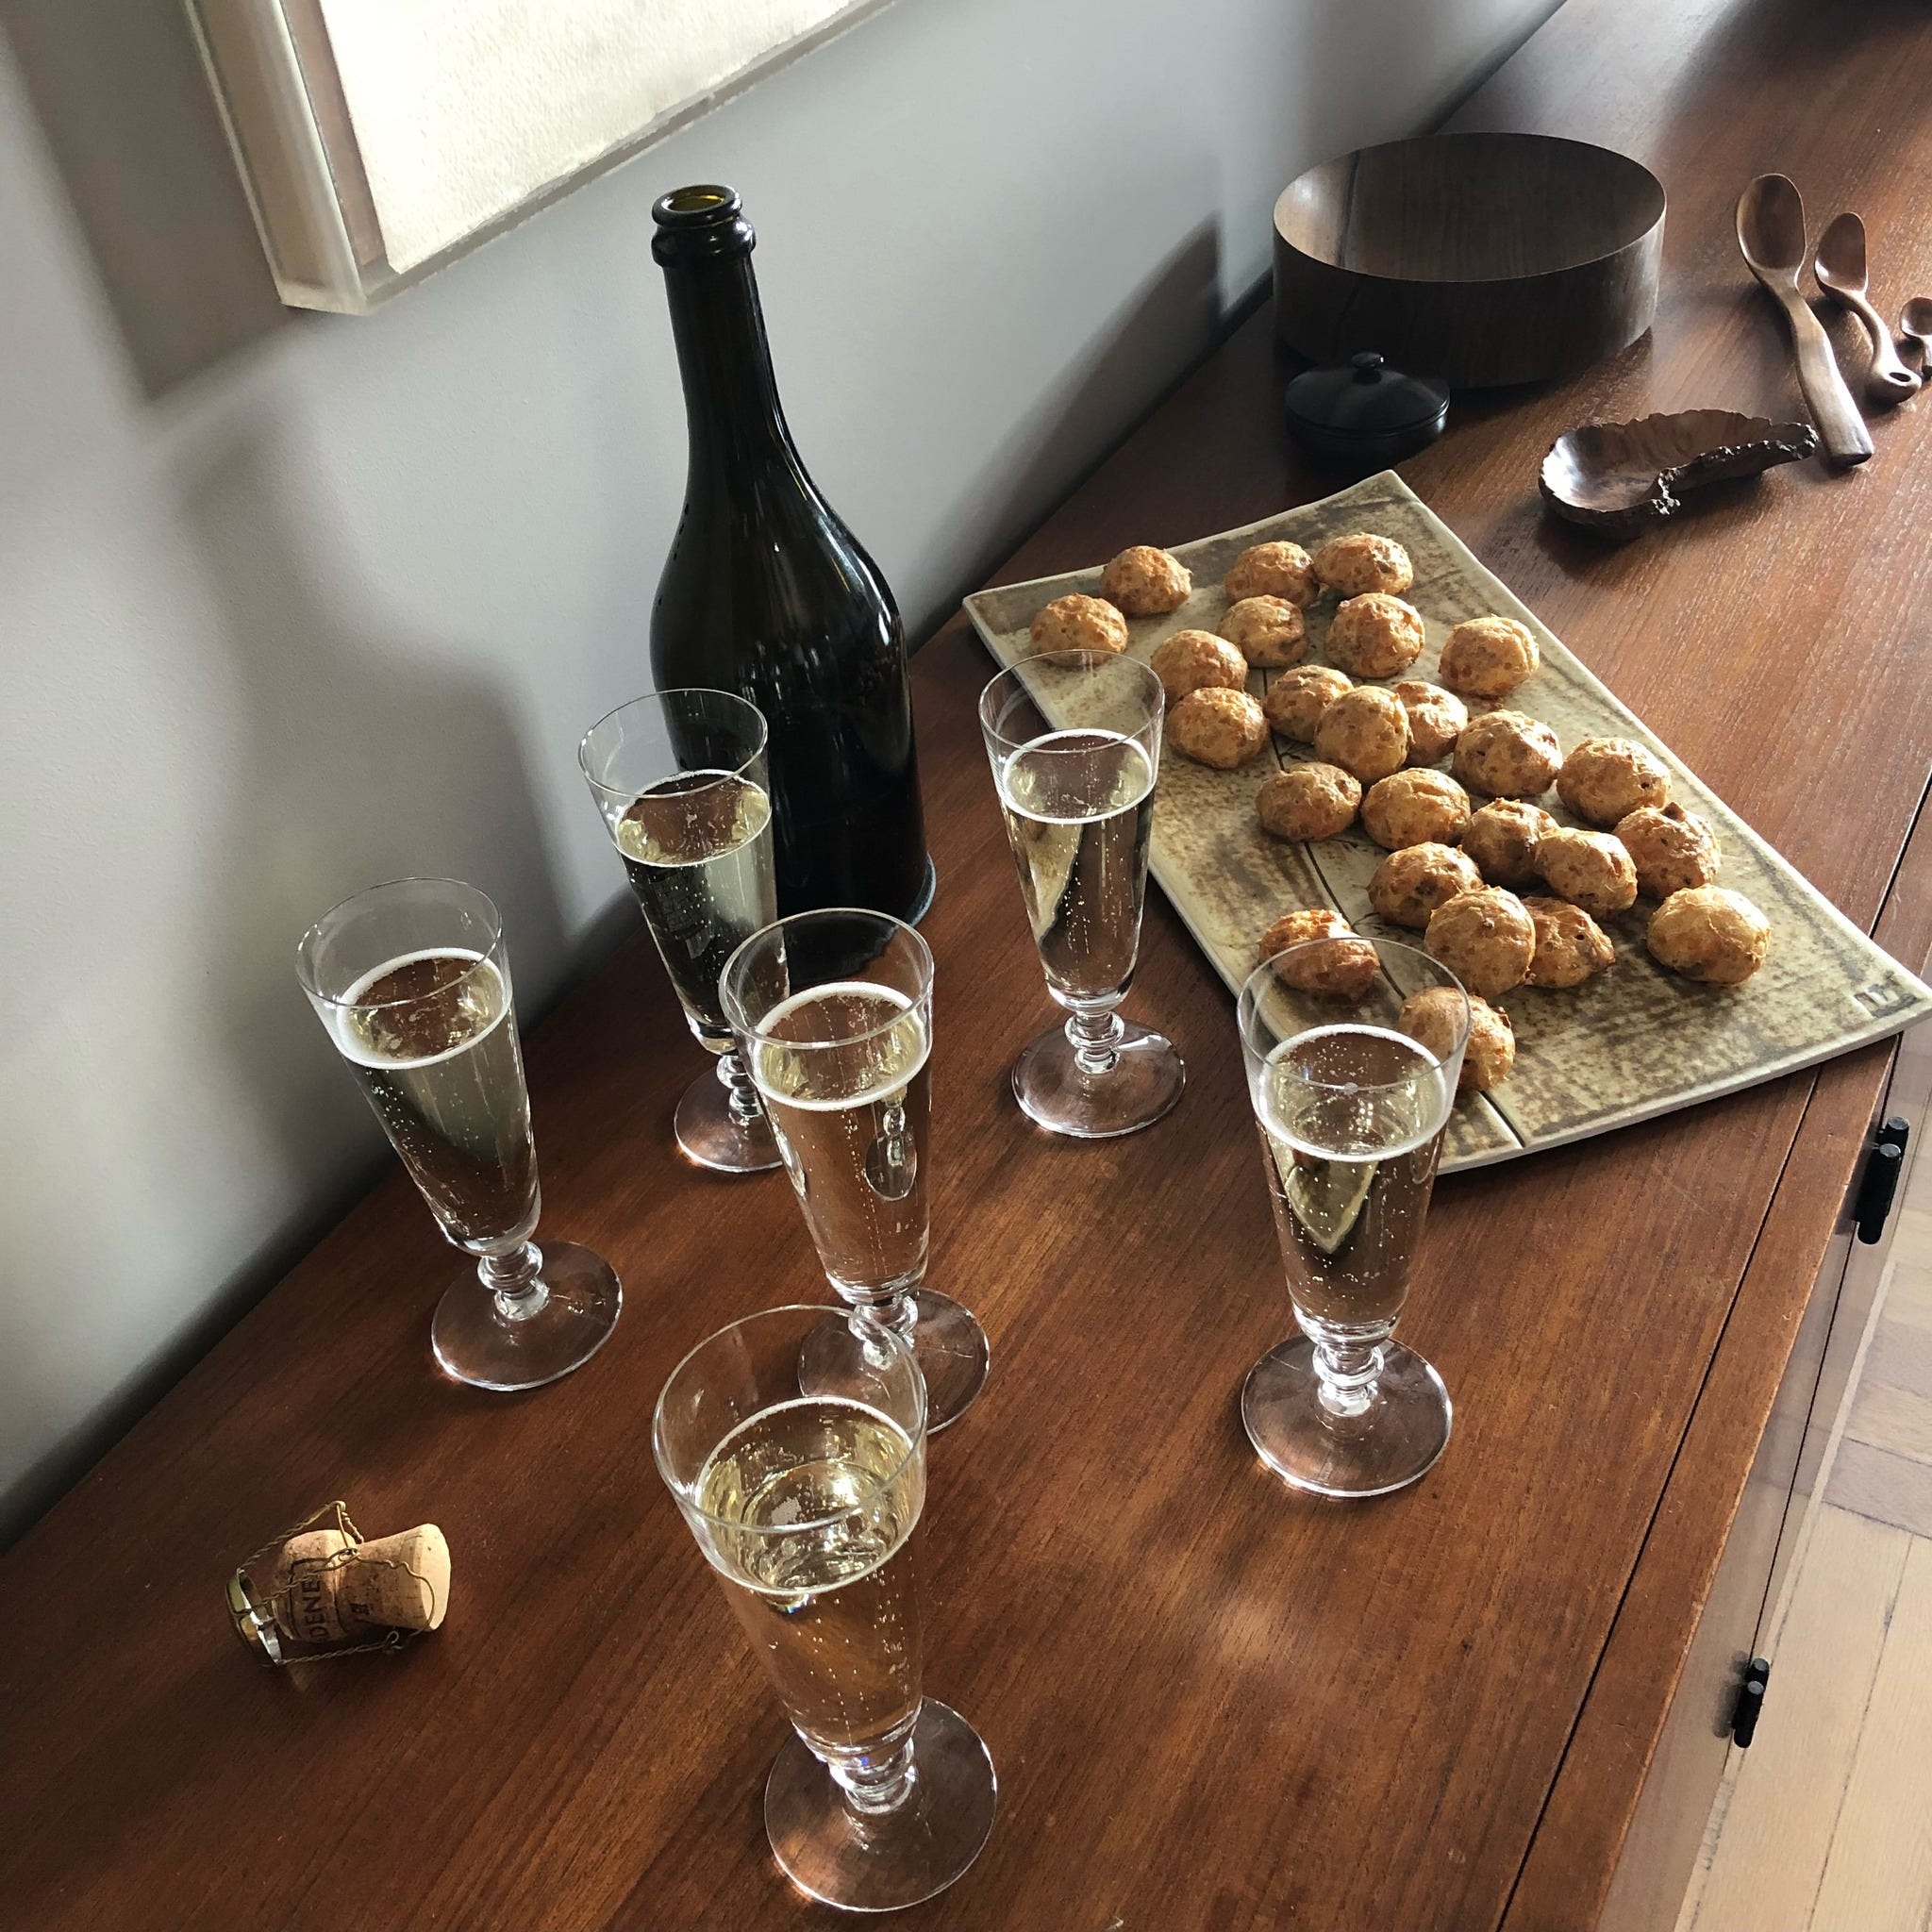 I'm French, Here's How To Host The Perfect French Apéritif